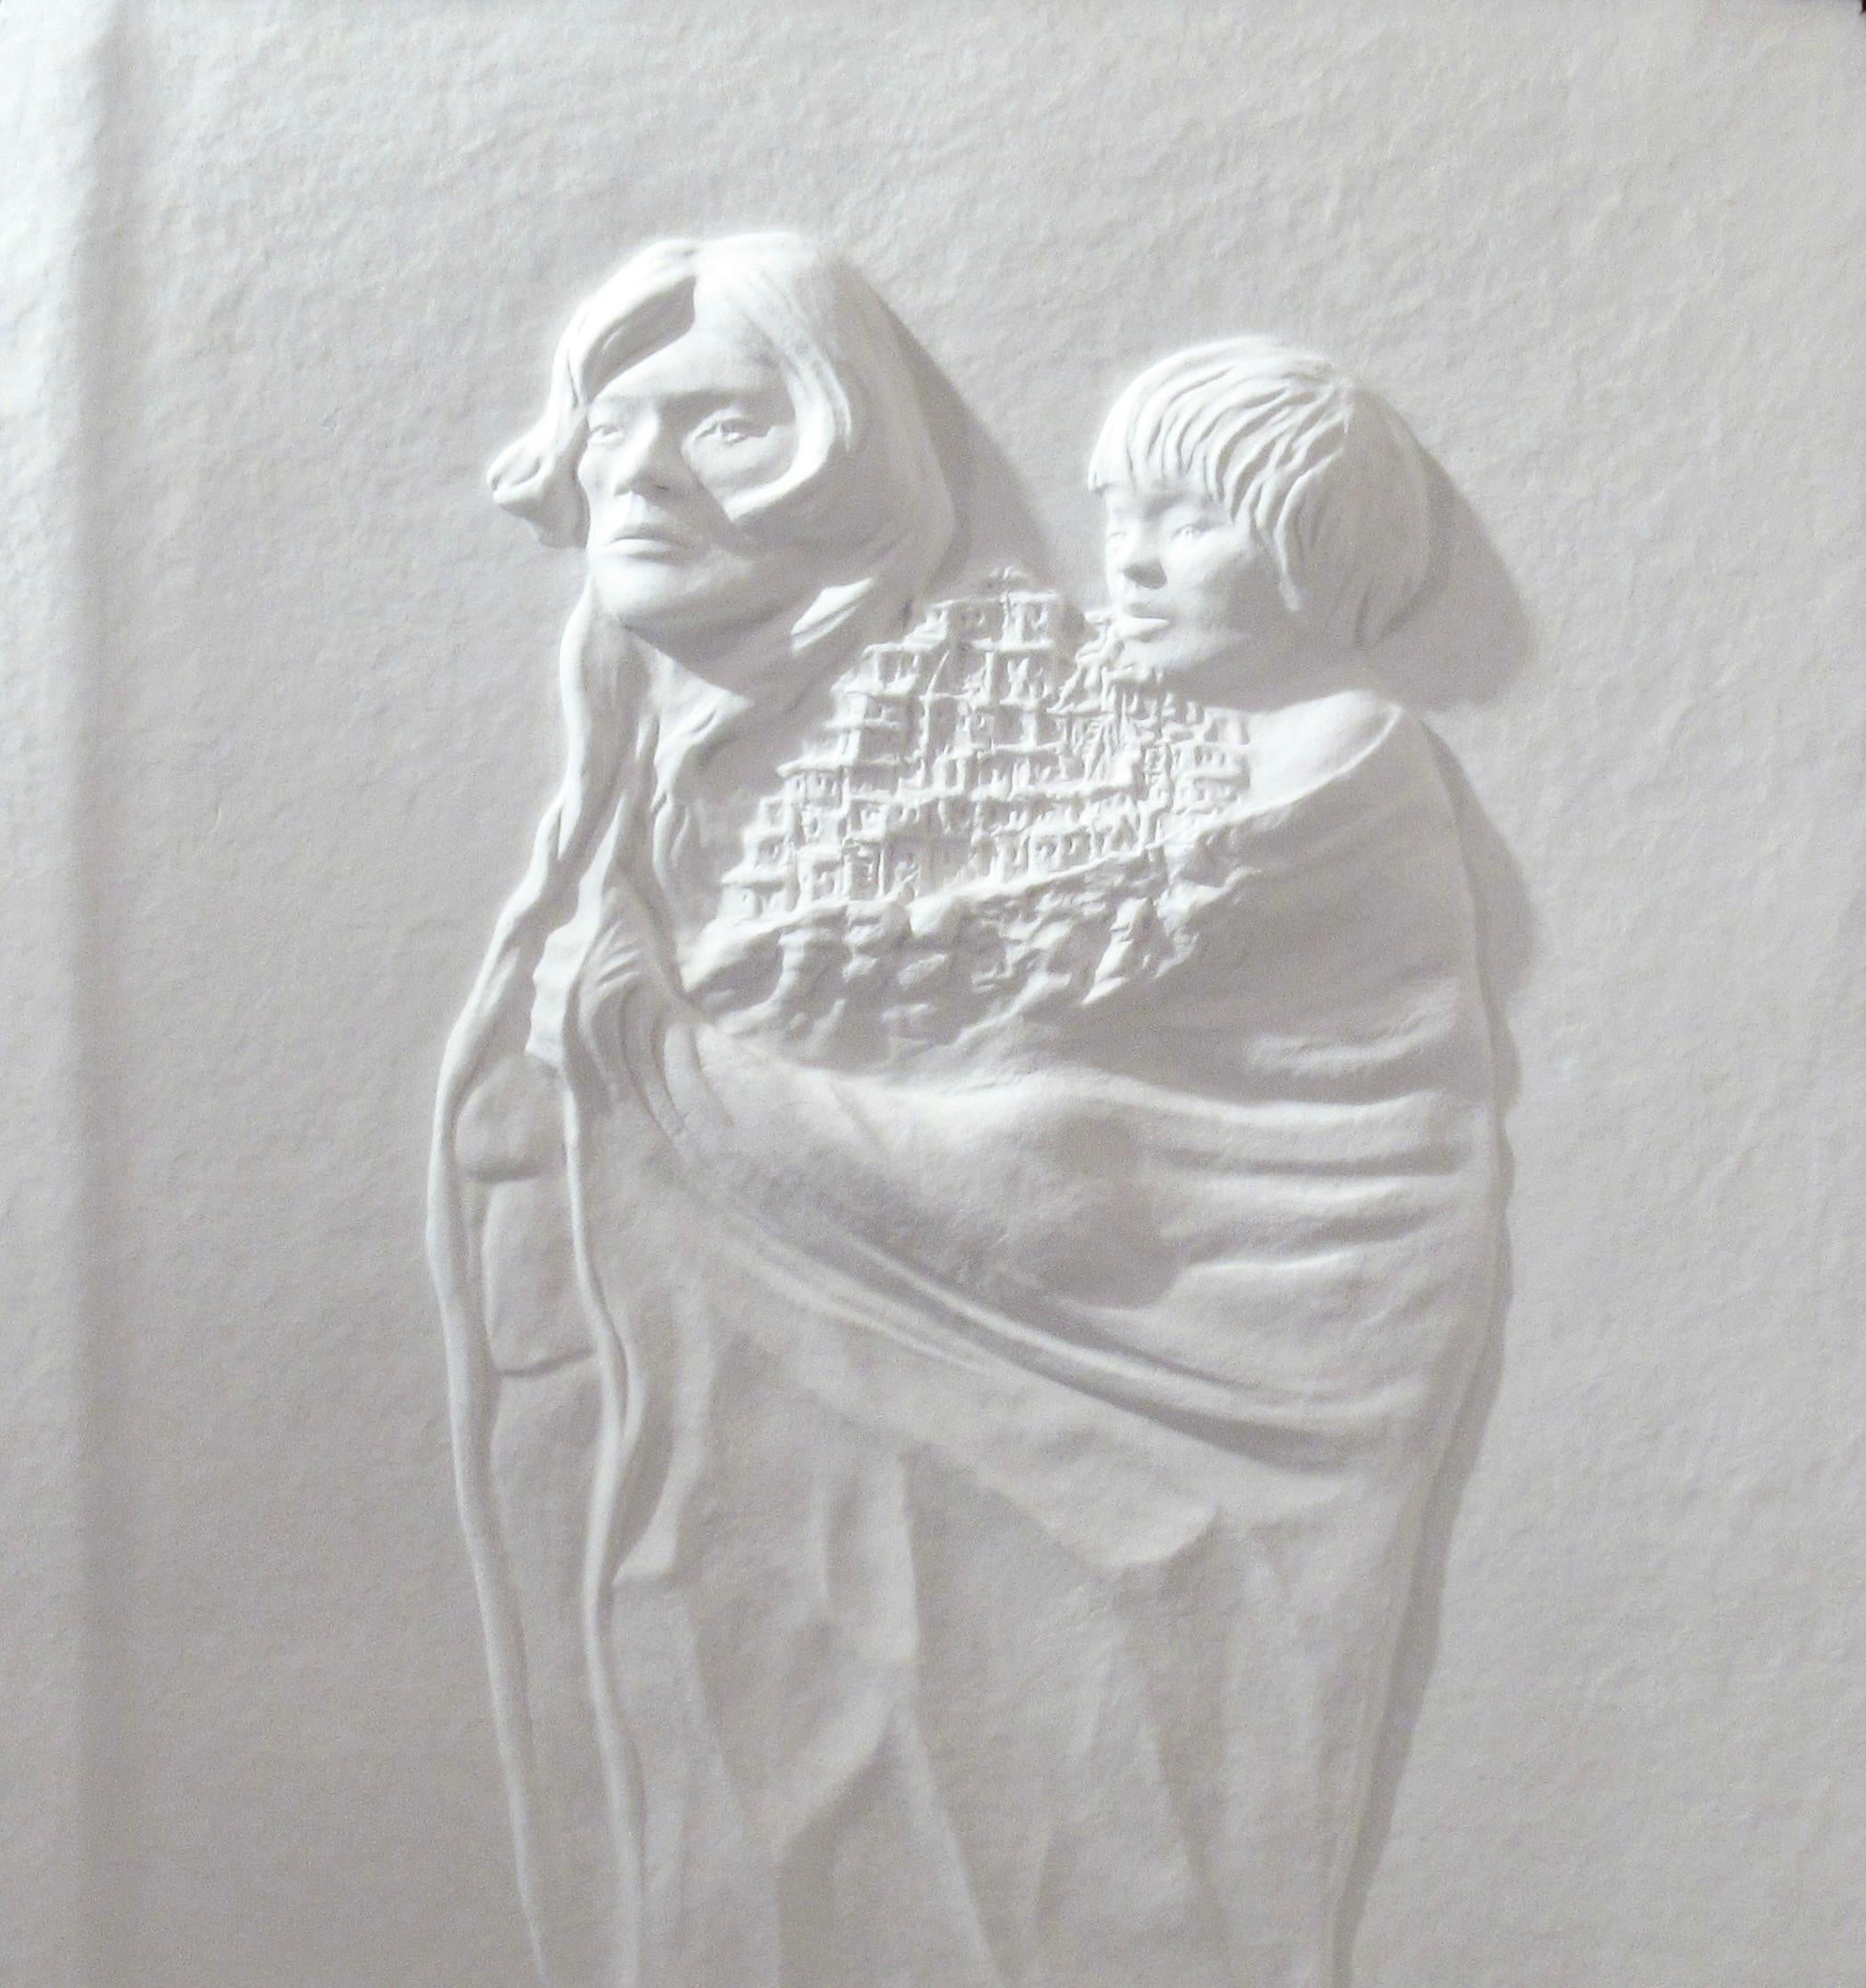 Native American Indian Woman and Baby - American Modern Sculpture by Carlo Wahlbeck